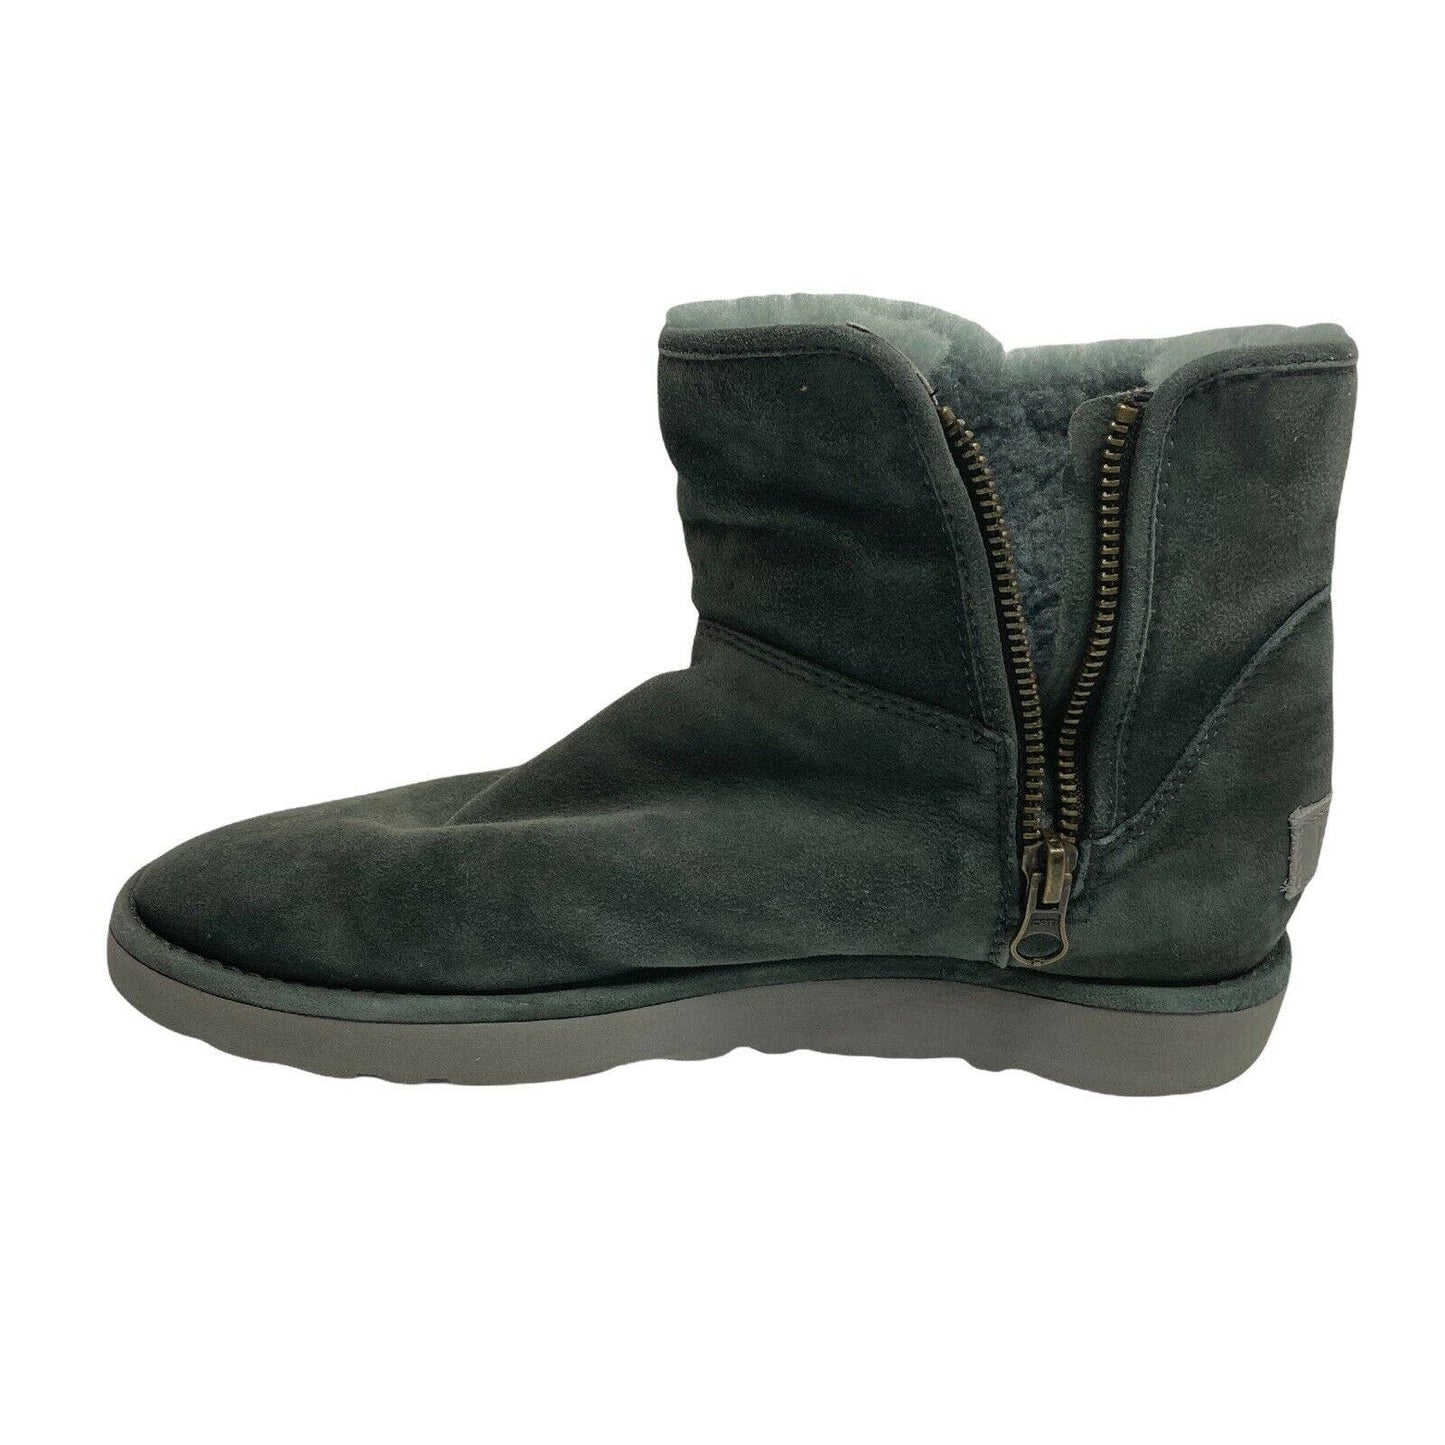 UGG ABREE II MINI Grigio Green SUEDE SHEARLING ANKLE BOOTS 1016548 size 7